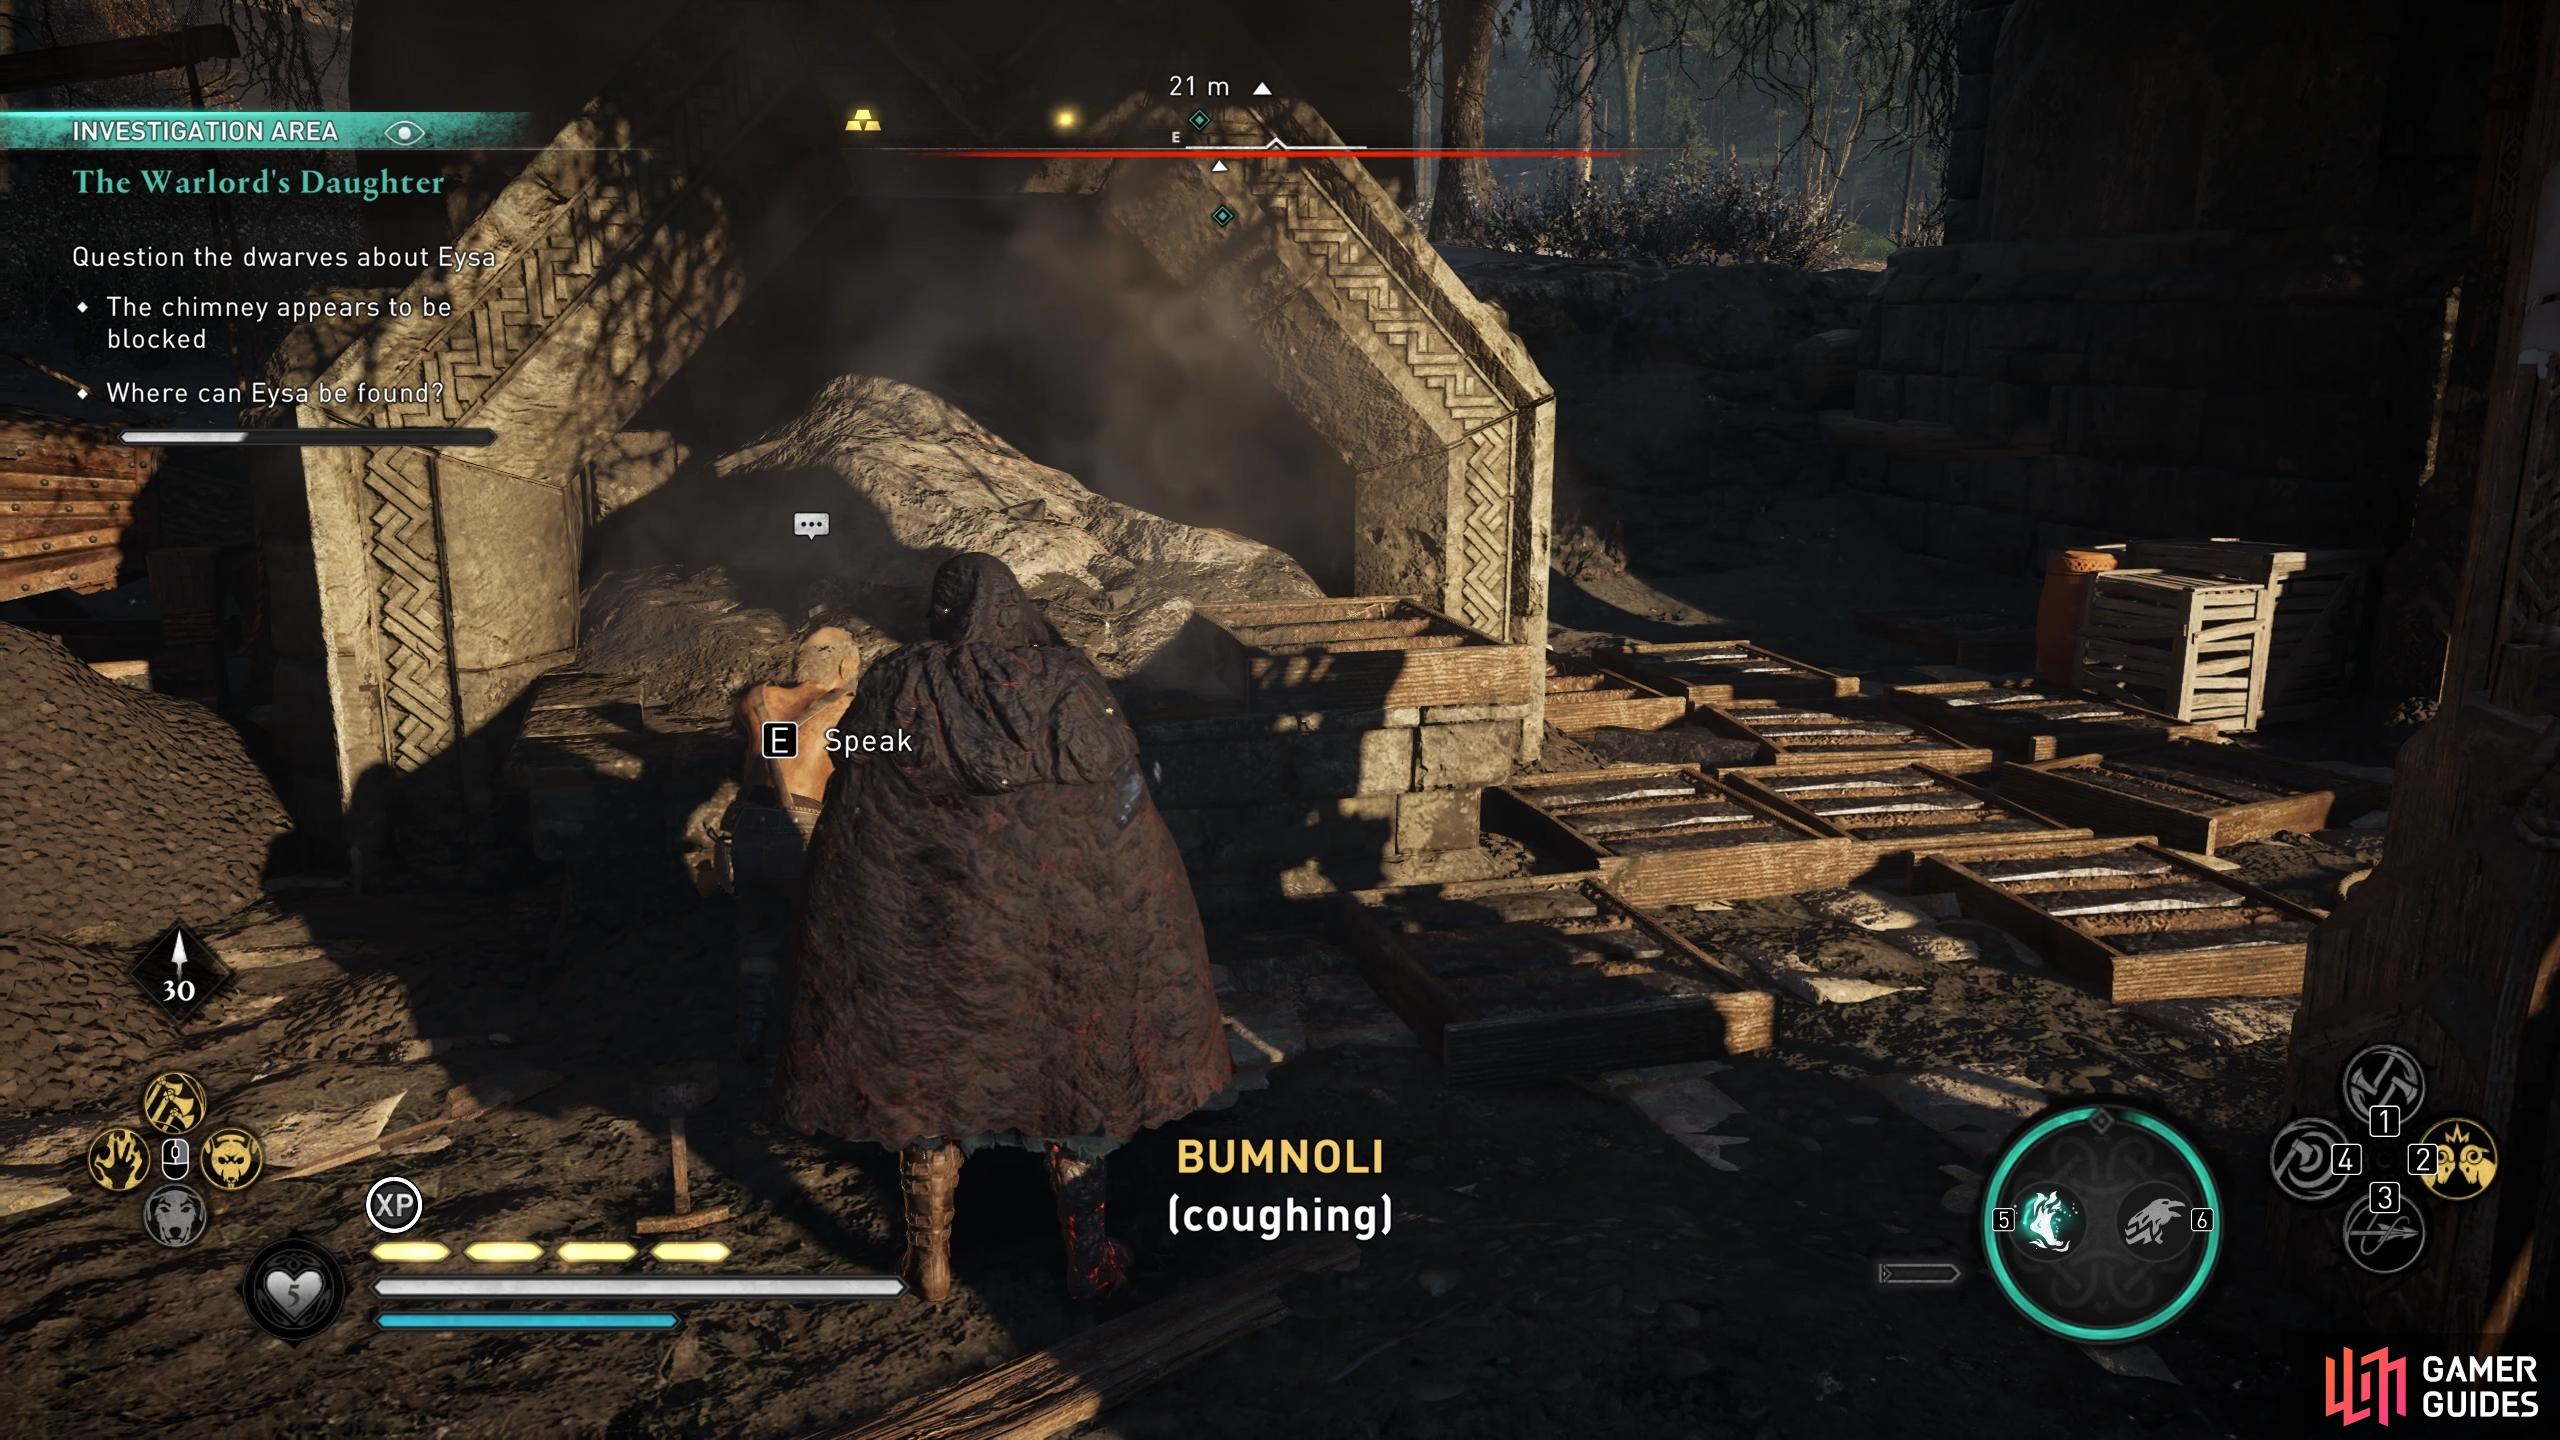 You can speak with Bumnoli once youve fixed his forge for key information on where to find the blacksmith.